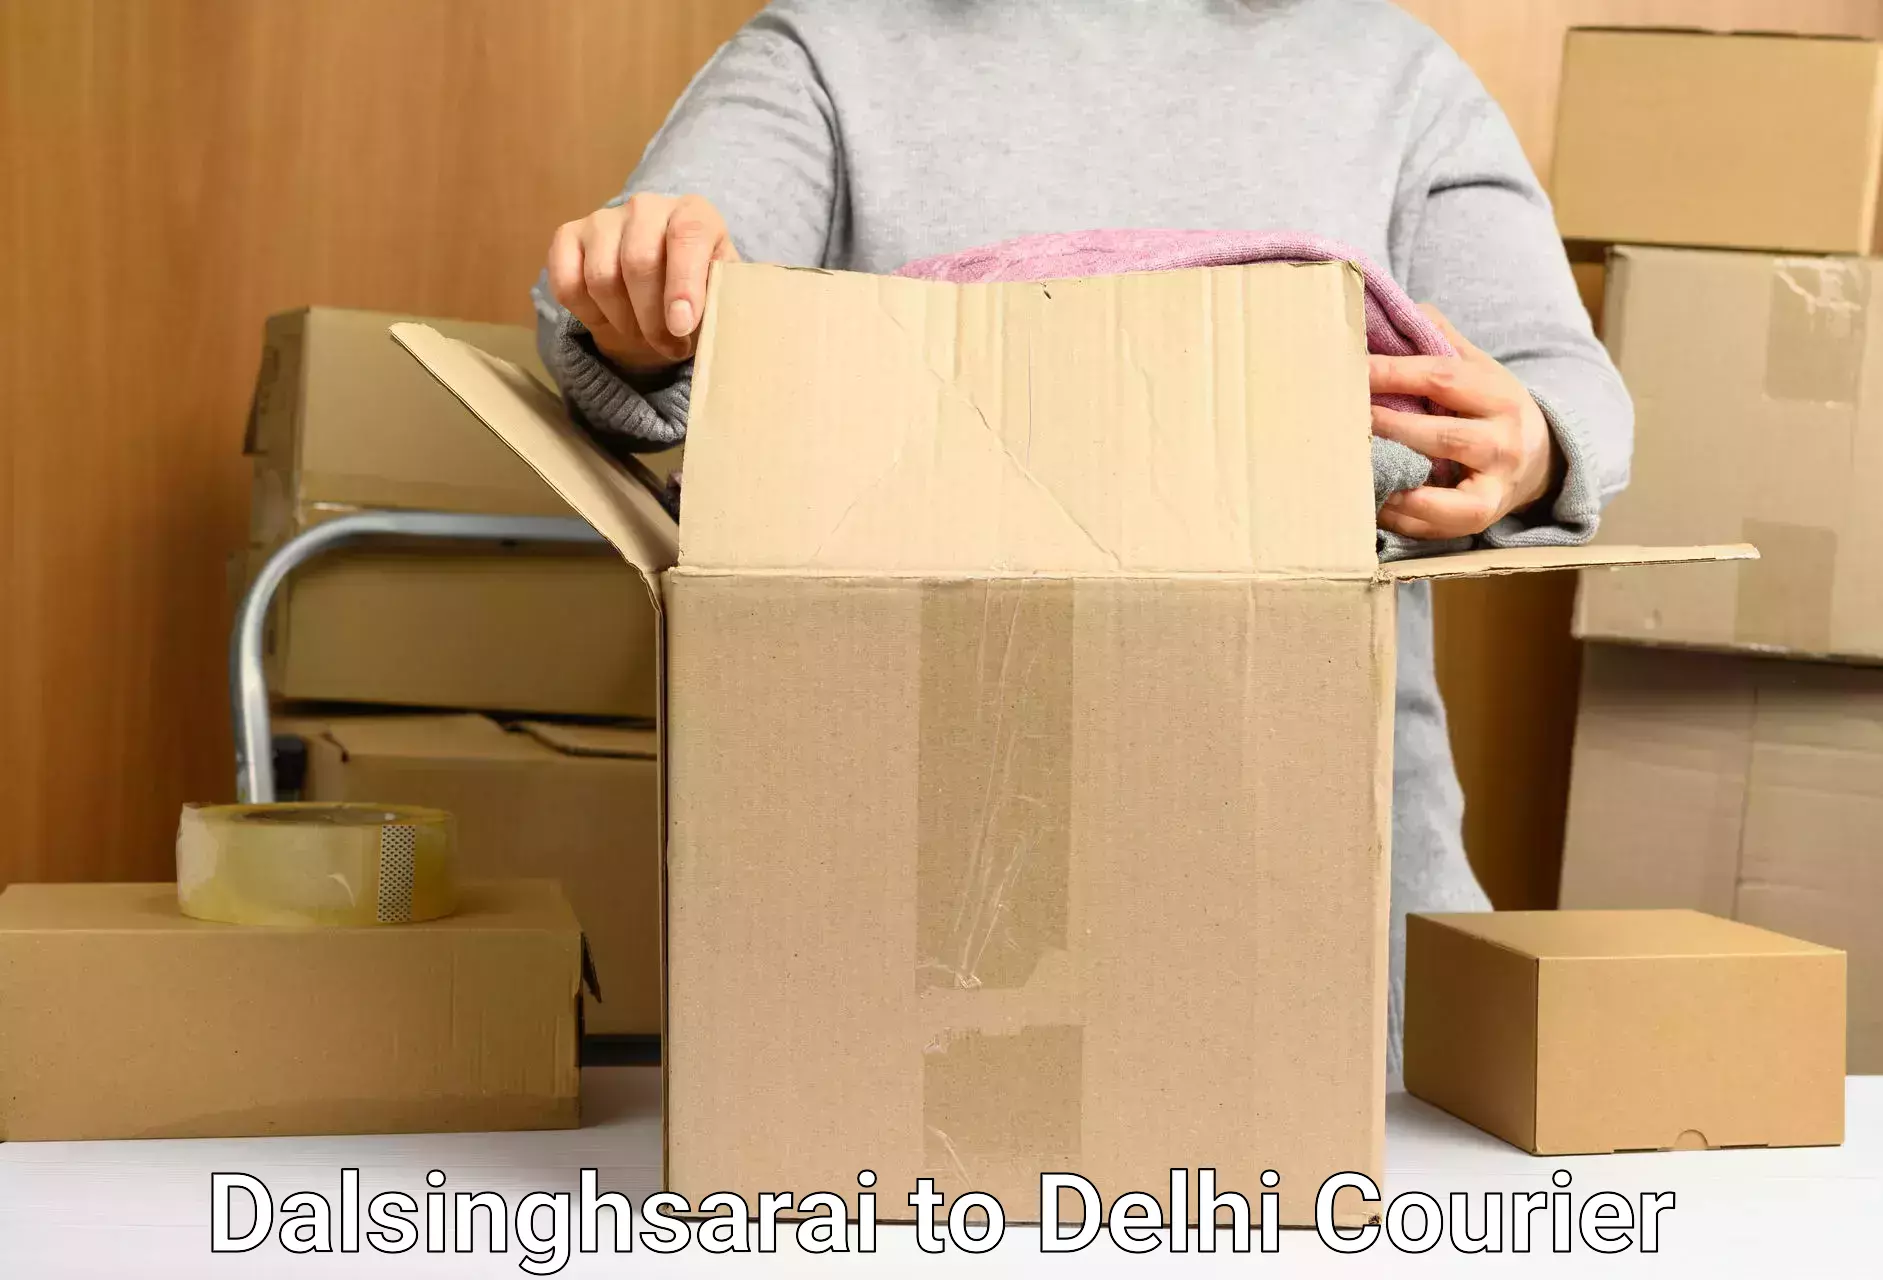 Next-day freight services Dalsinghsarai to NCR